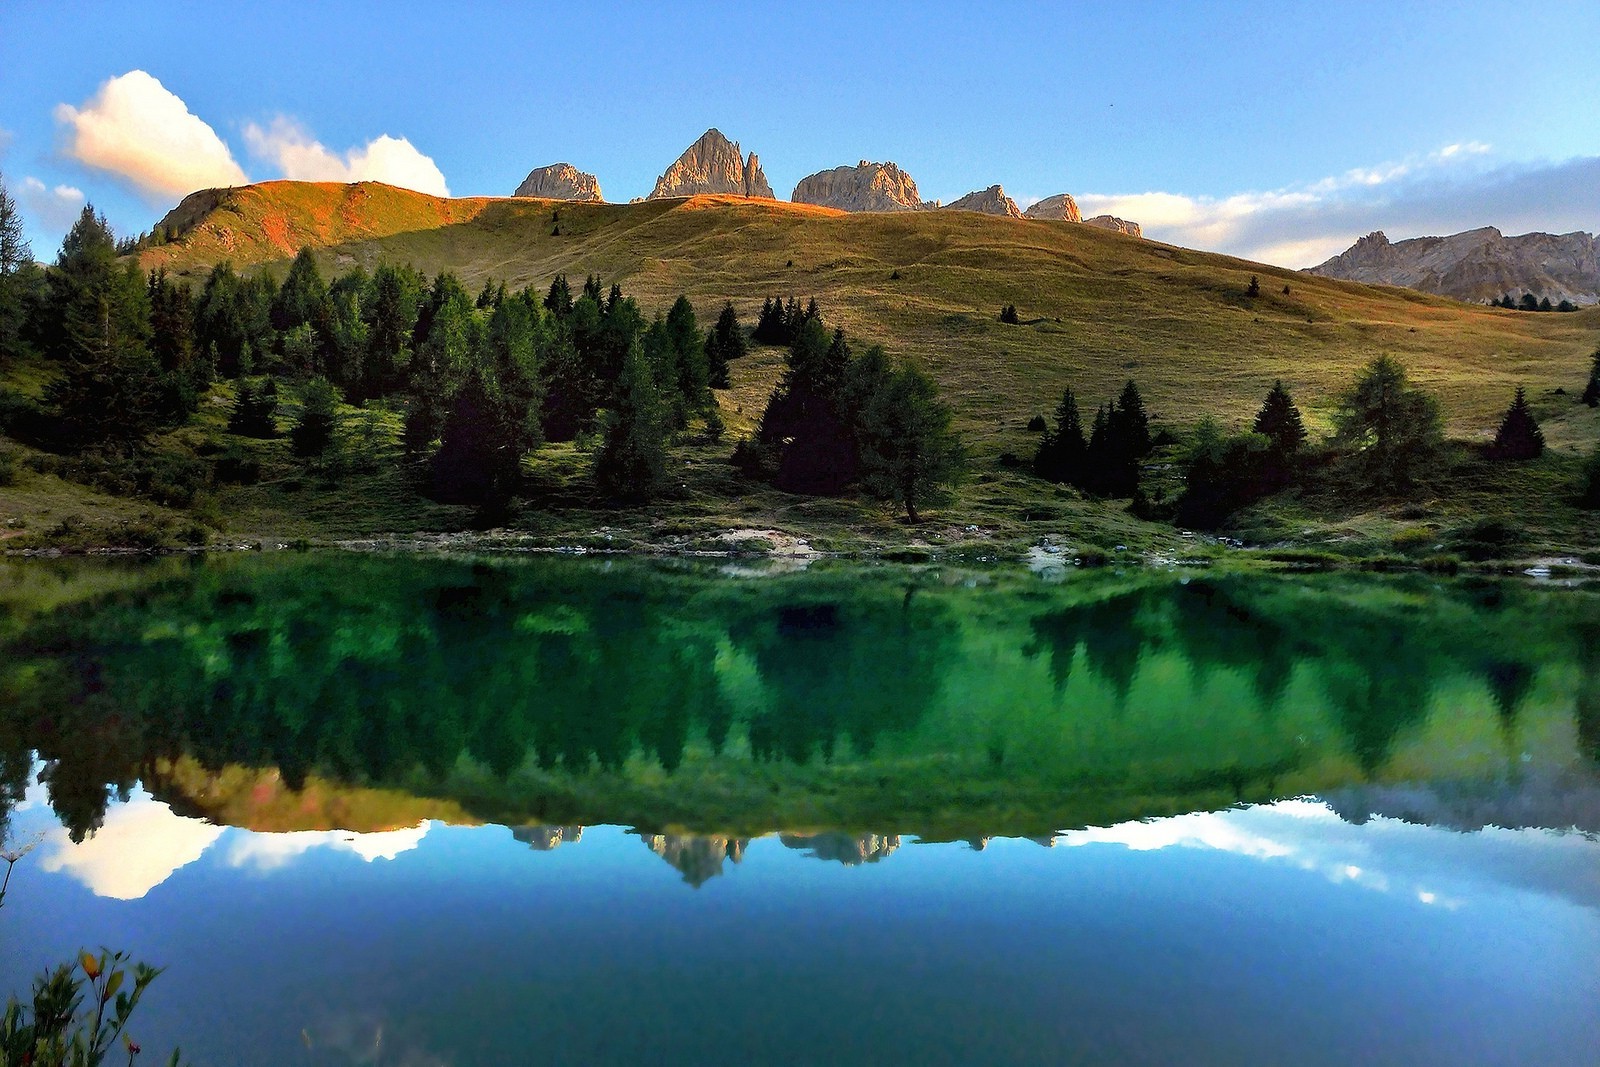 landscape, Nature, Photography, Lake, Mountains, Trees, Sunset, Calm, Reflection, Summer, Alps, Italy Wallpaper